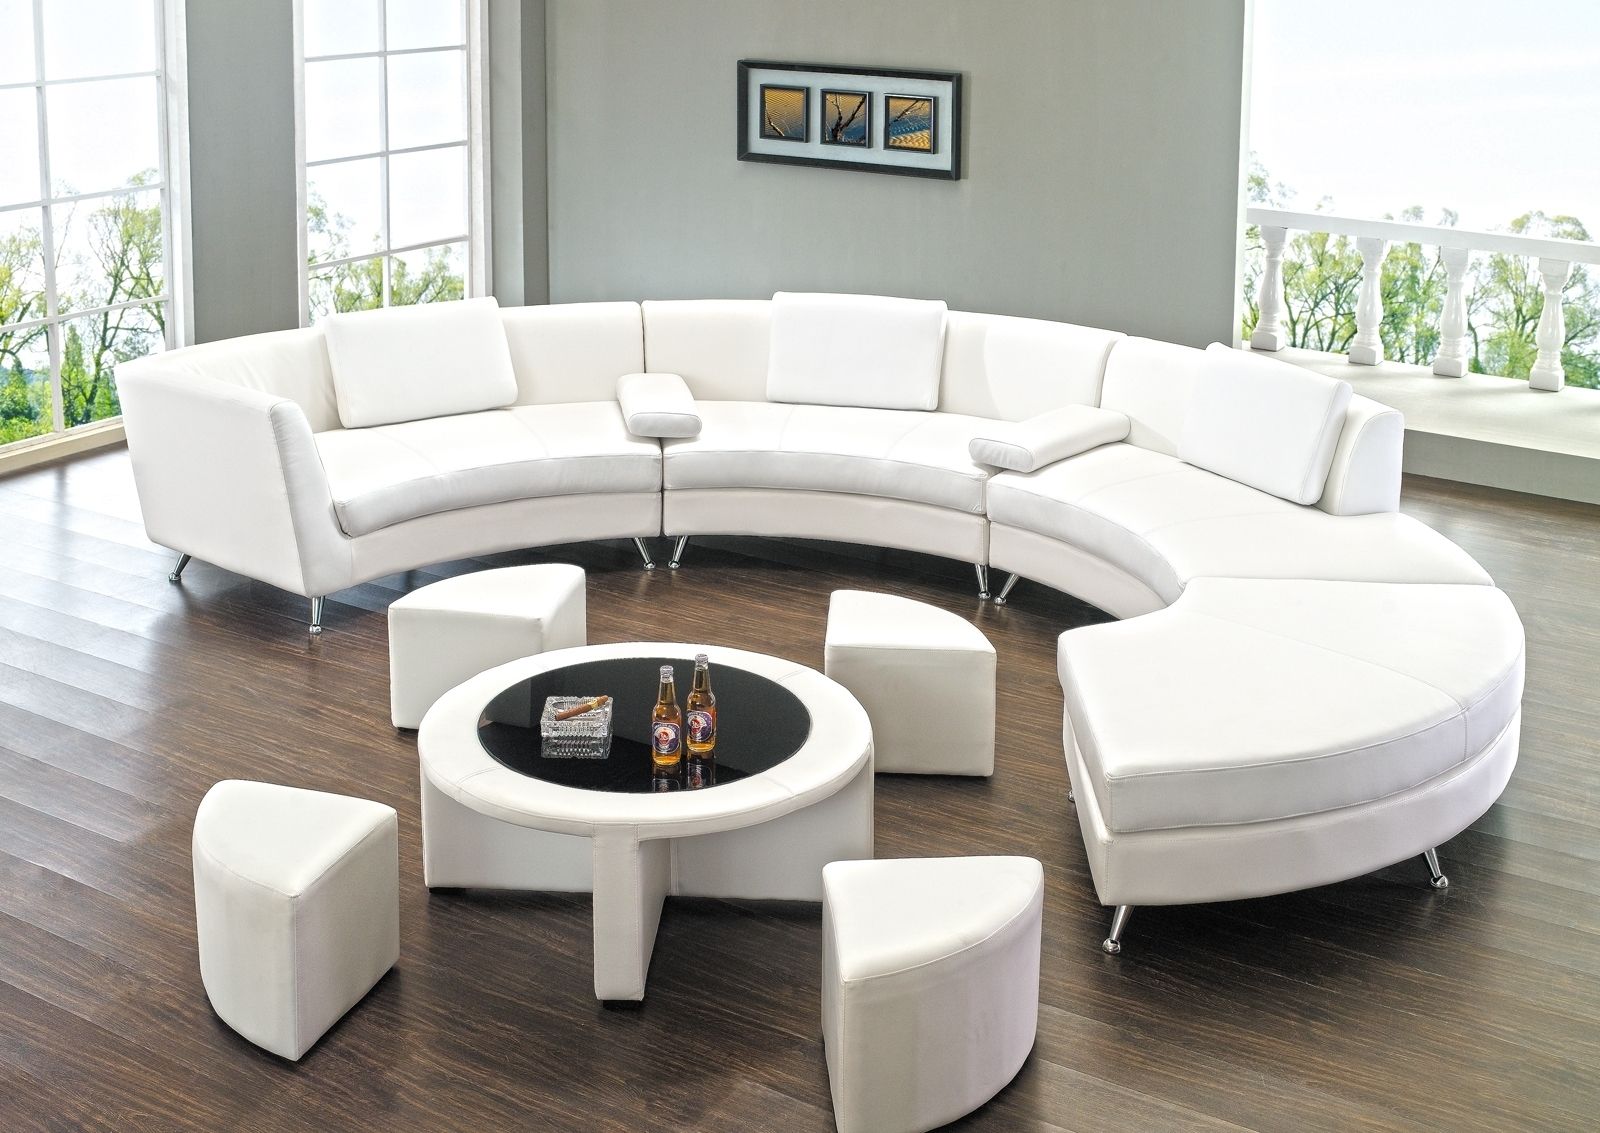 Round Sectional Sofa Has One Of The Best Kind Of Other Is Sectionals Intended For Circular Sectional Sofas (View 3 of 10)